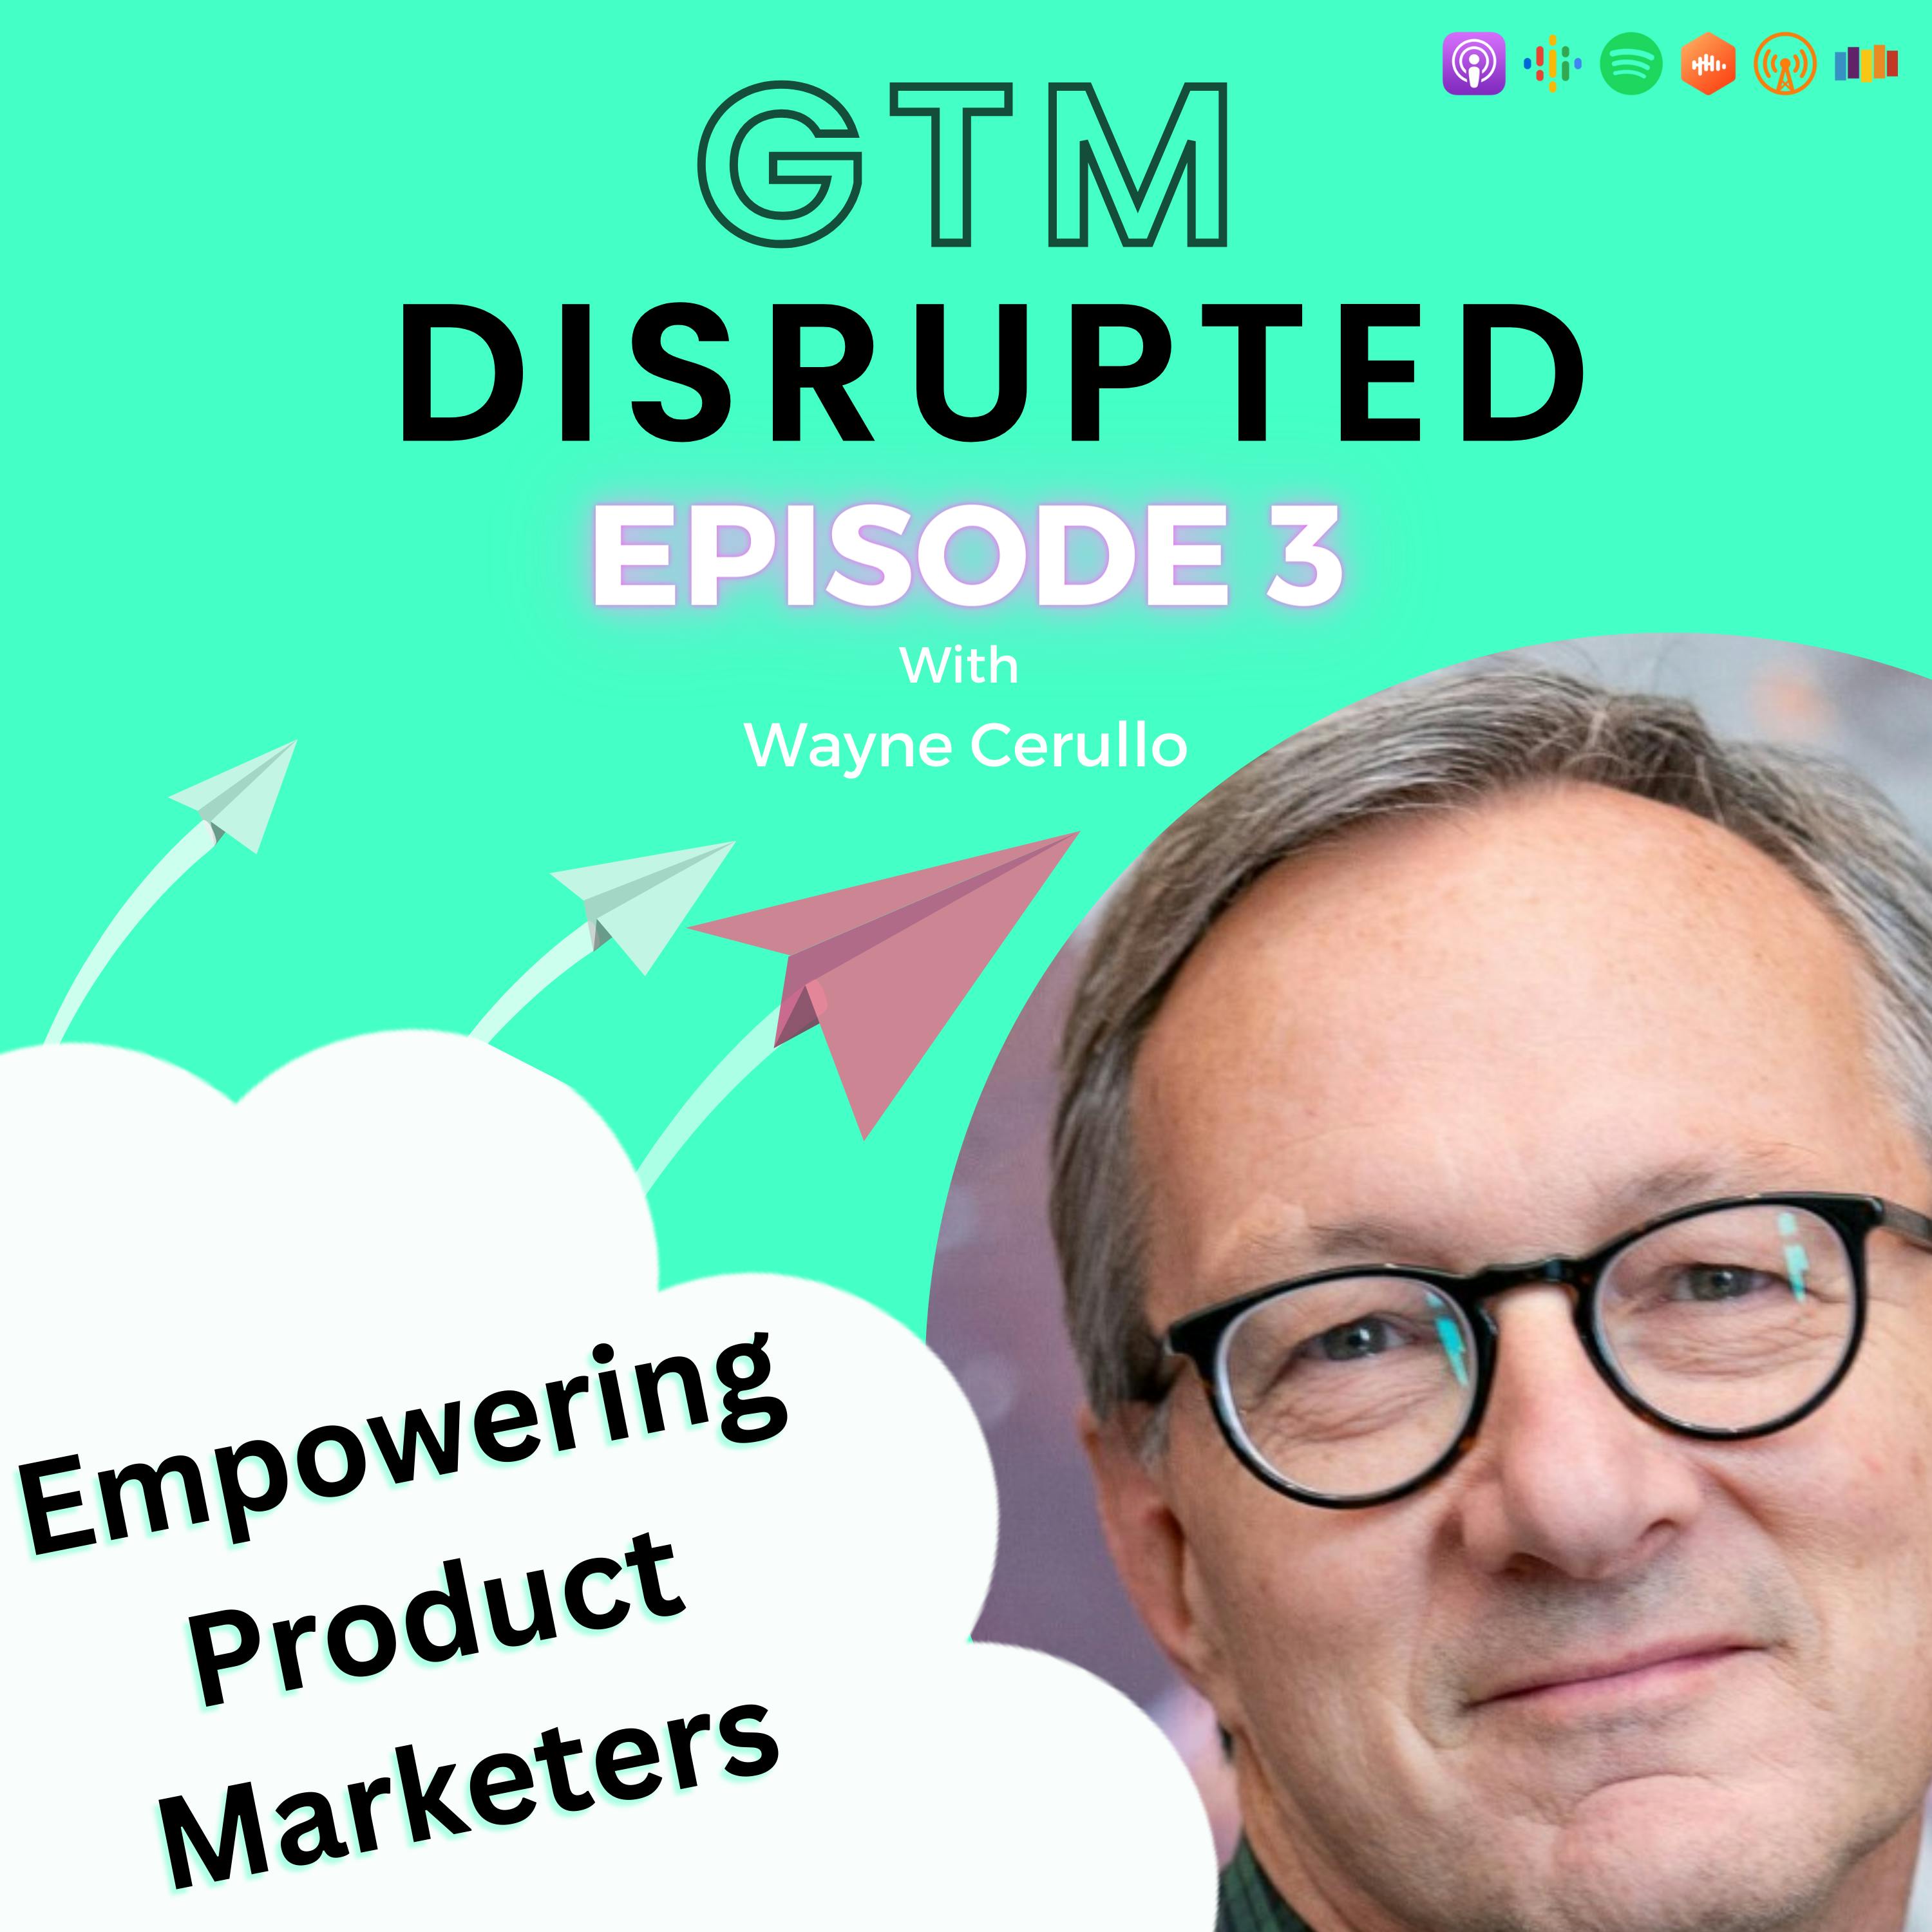 Empowering product marketers to be the future change makers in the modern B2B businesses with Wayne Cerullo